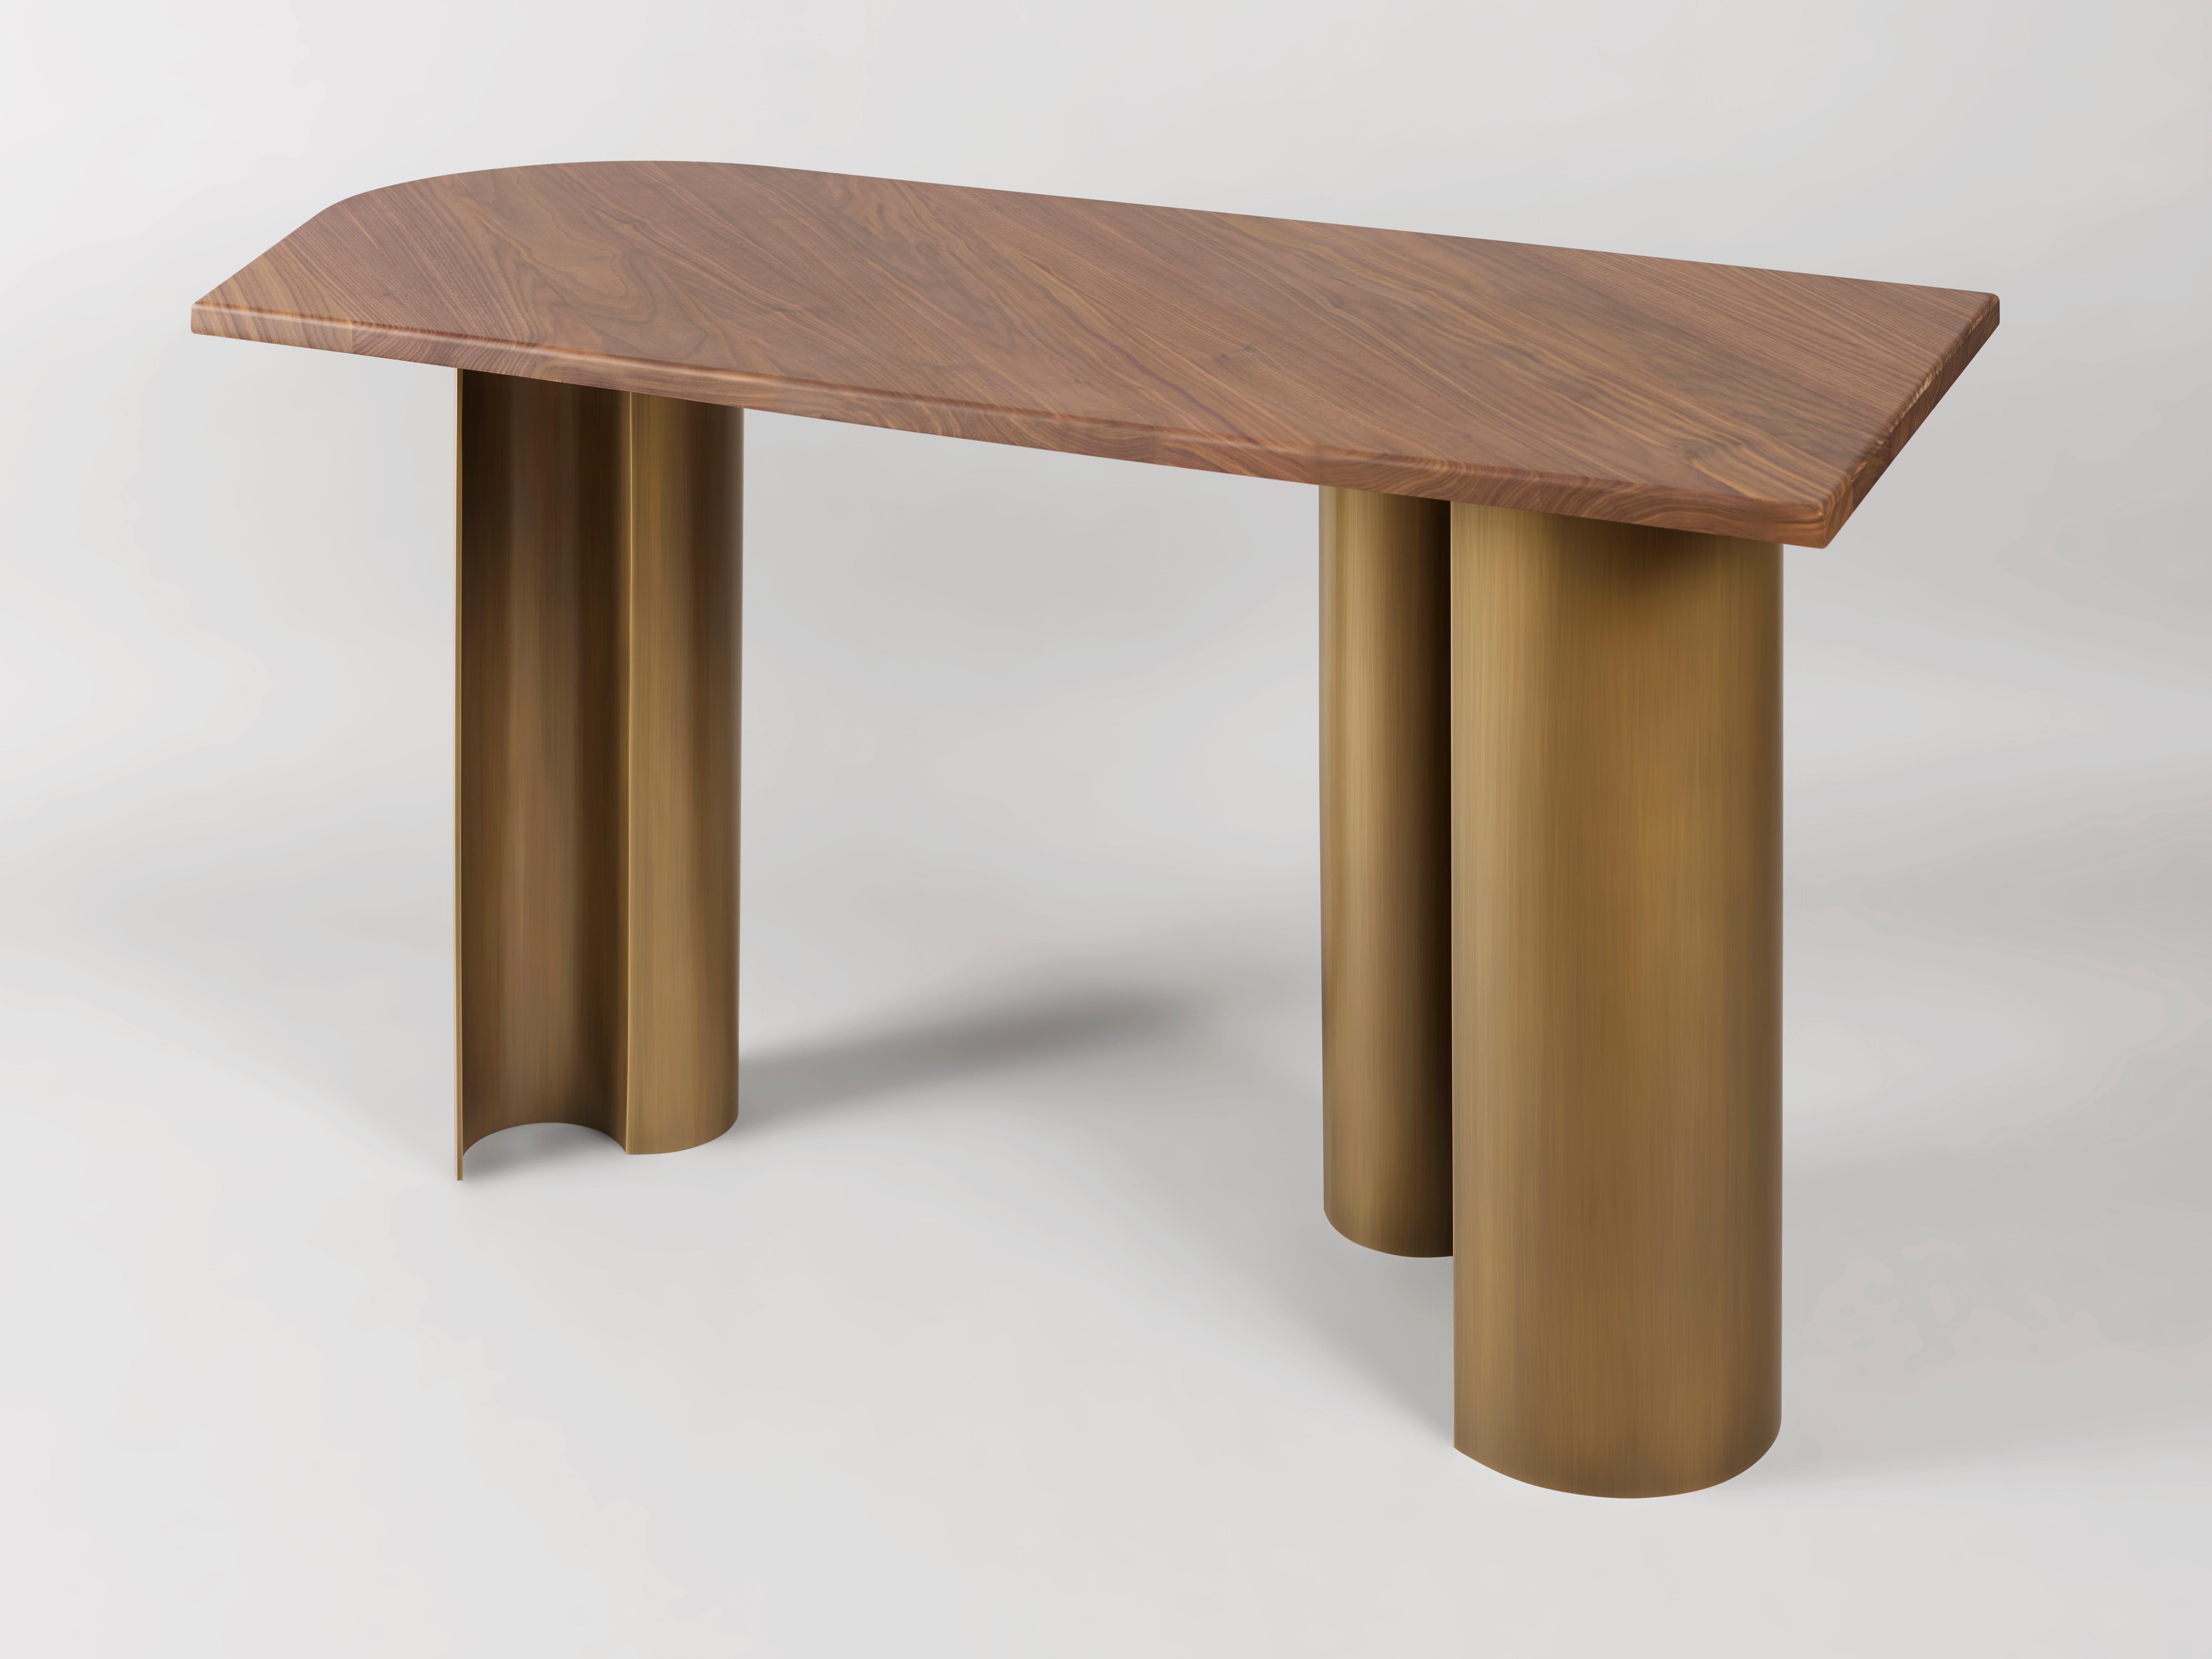 ‘Arche’ desk by French Lebanese Charles Kalpakian is a true gem, resounding in its elegance, simplicity, graphic unity and the complementarily of materials. Curves and straight lines fuse in an organic geometry. The satin glow of the varnished